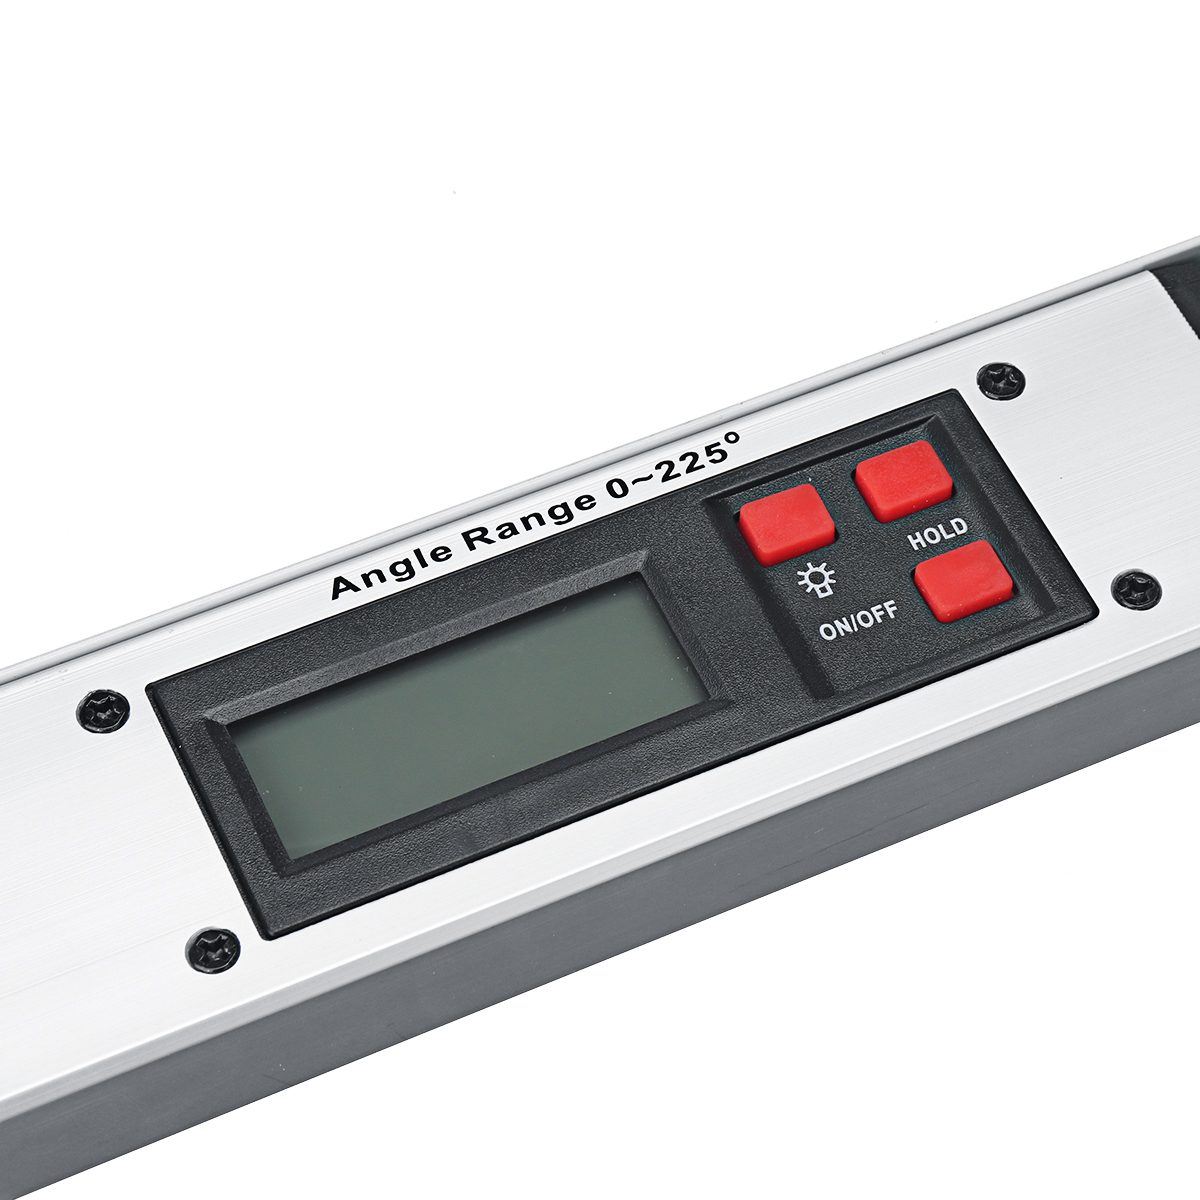 250400mm-Digital-Angle-Level-Meter-LCD-Display-0-225-Degree-for-Measuring-Roof-Angles-Fitting-Up-Win-1740234-12